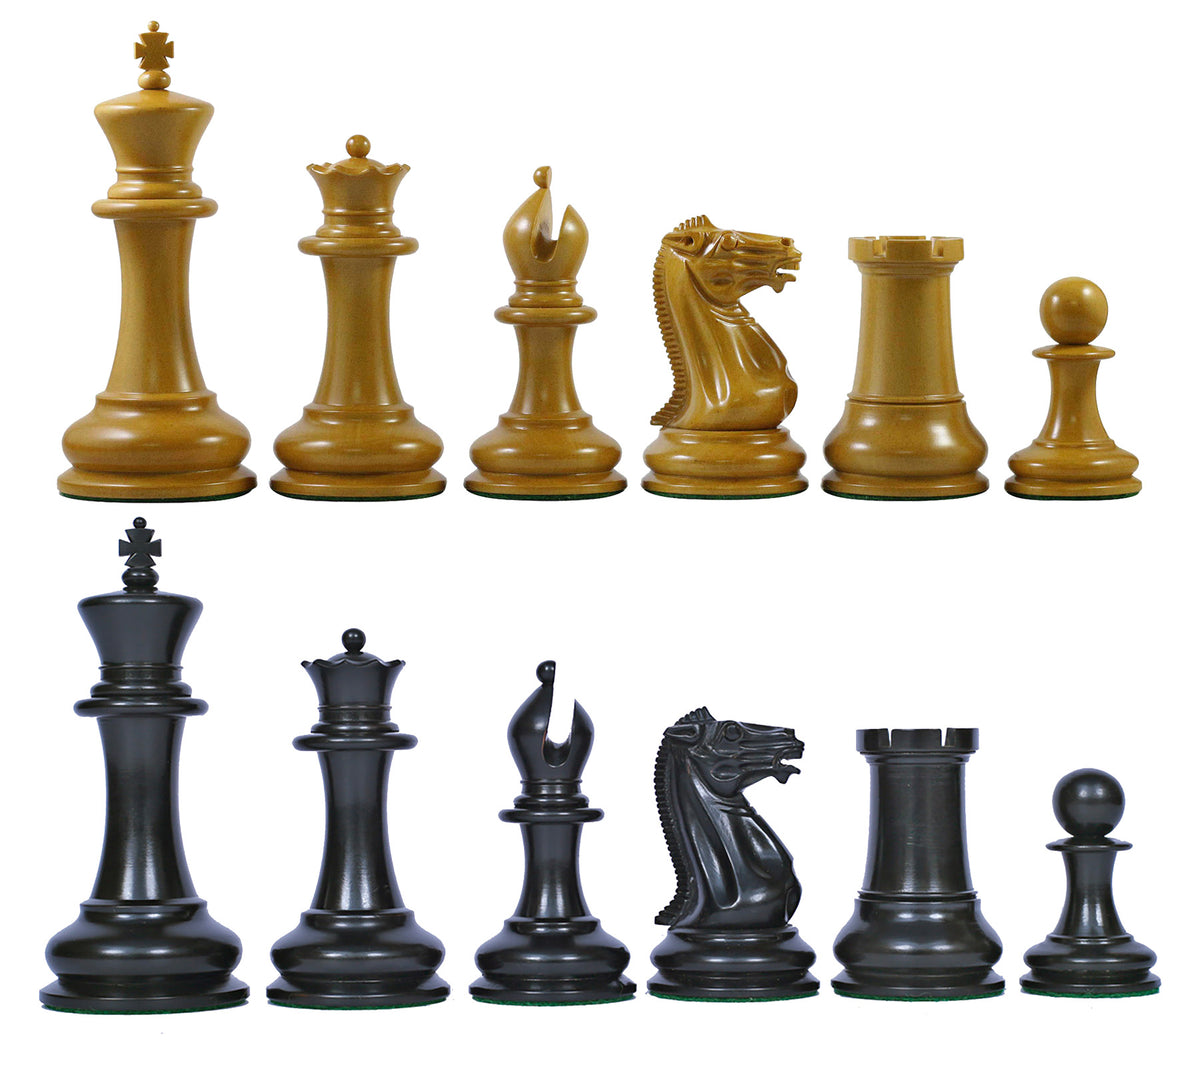 Jaques Reproduction 1850-55 Staunton Antiqued/Ebonised 4.4" Chess Pieces